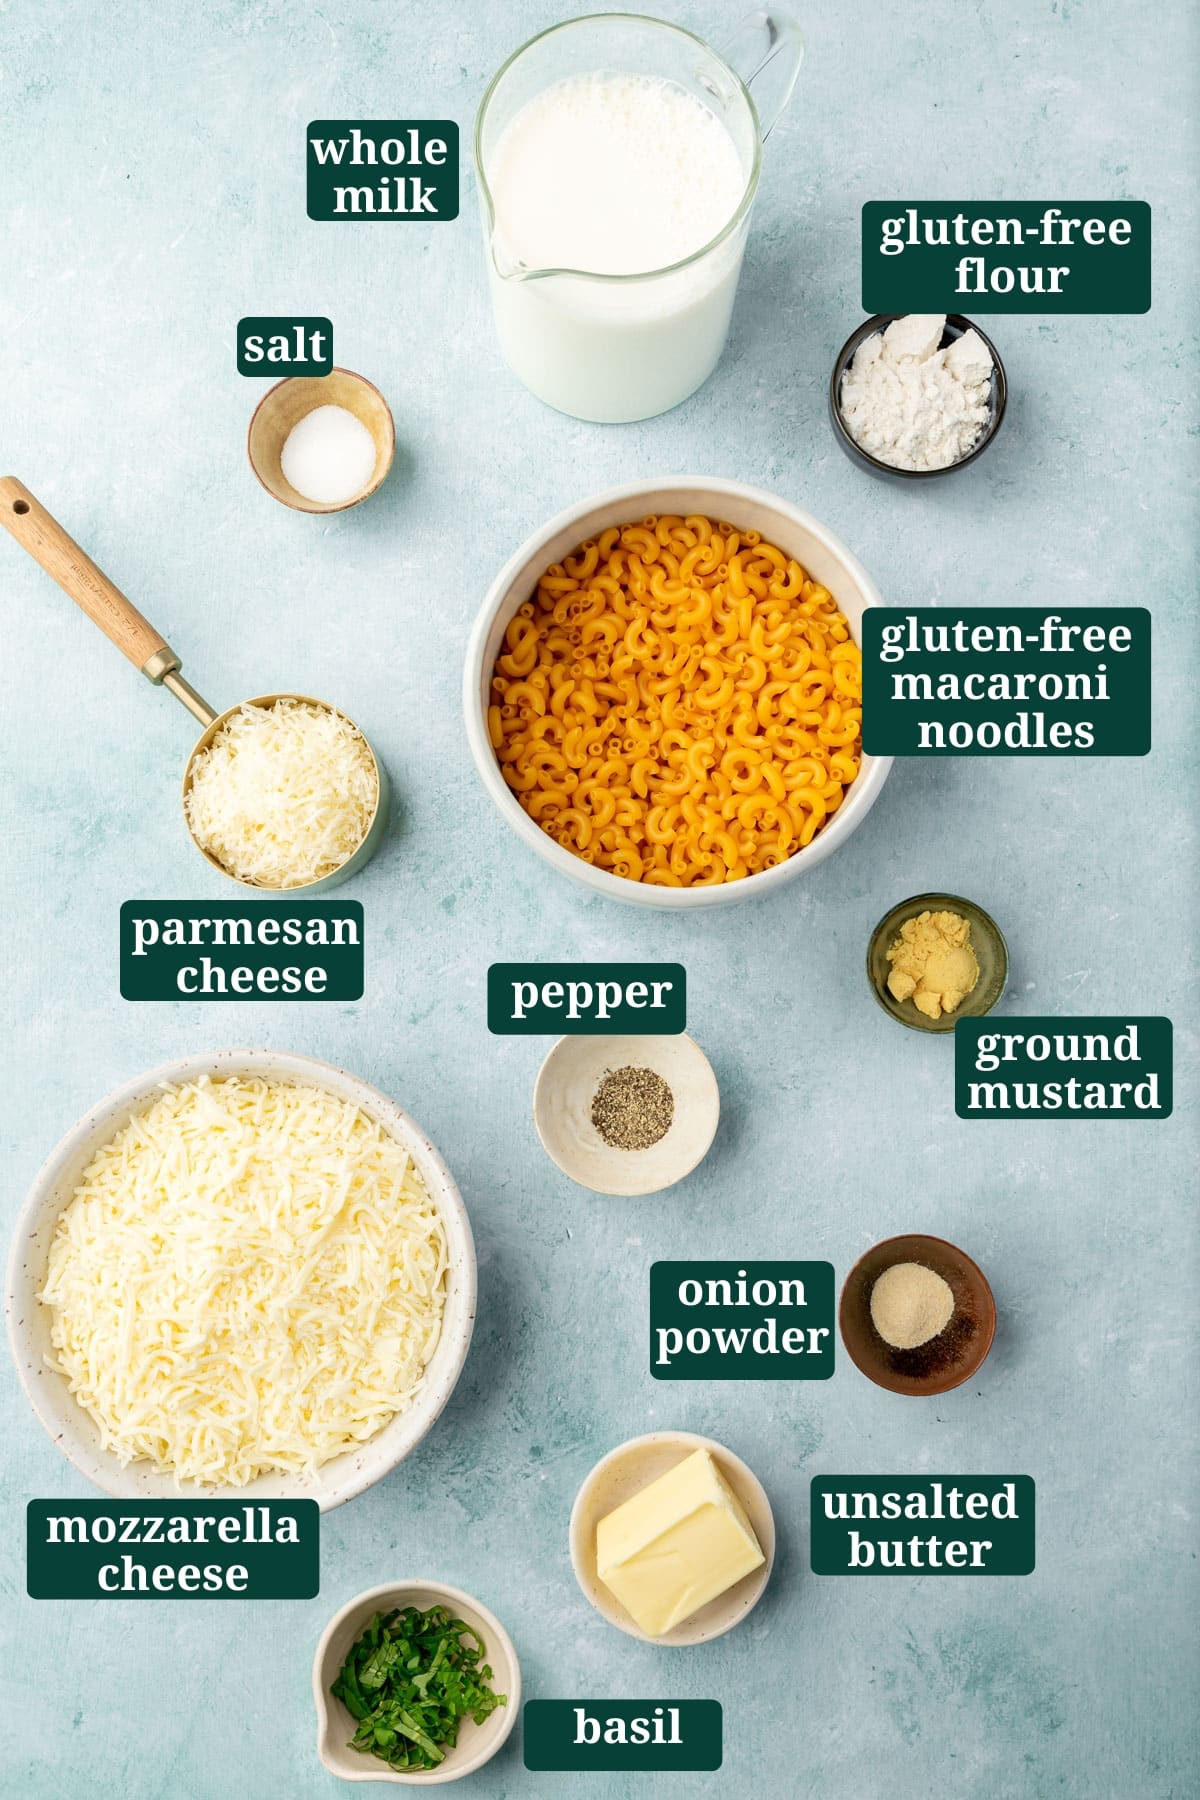 Ingredients in small bowls to make gluten-free mozzarella mac and cheese, including milk, gluten-free flour, parmesan cheese, mozzarella cheese, ground mustard, onion powder, unsalted butter, basil, and salt with a text overlay over each ingredient.